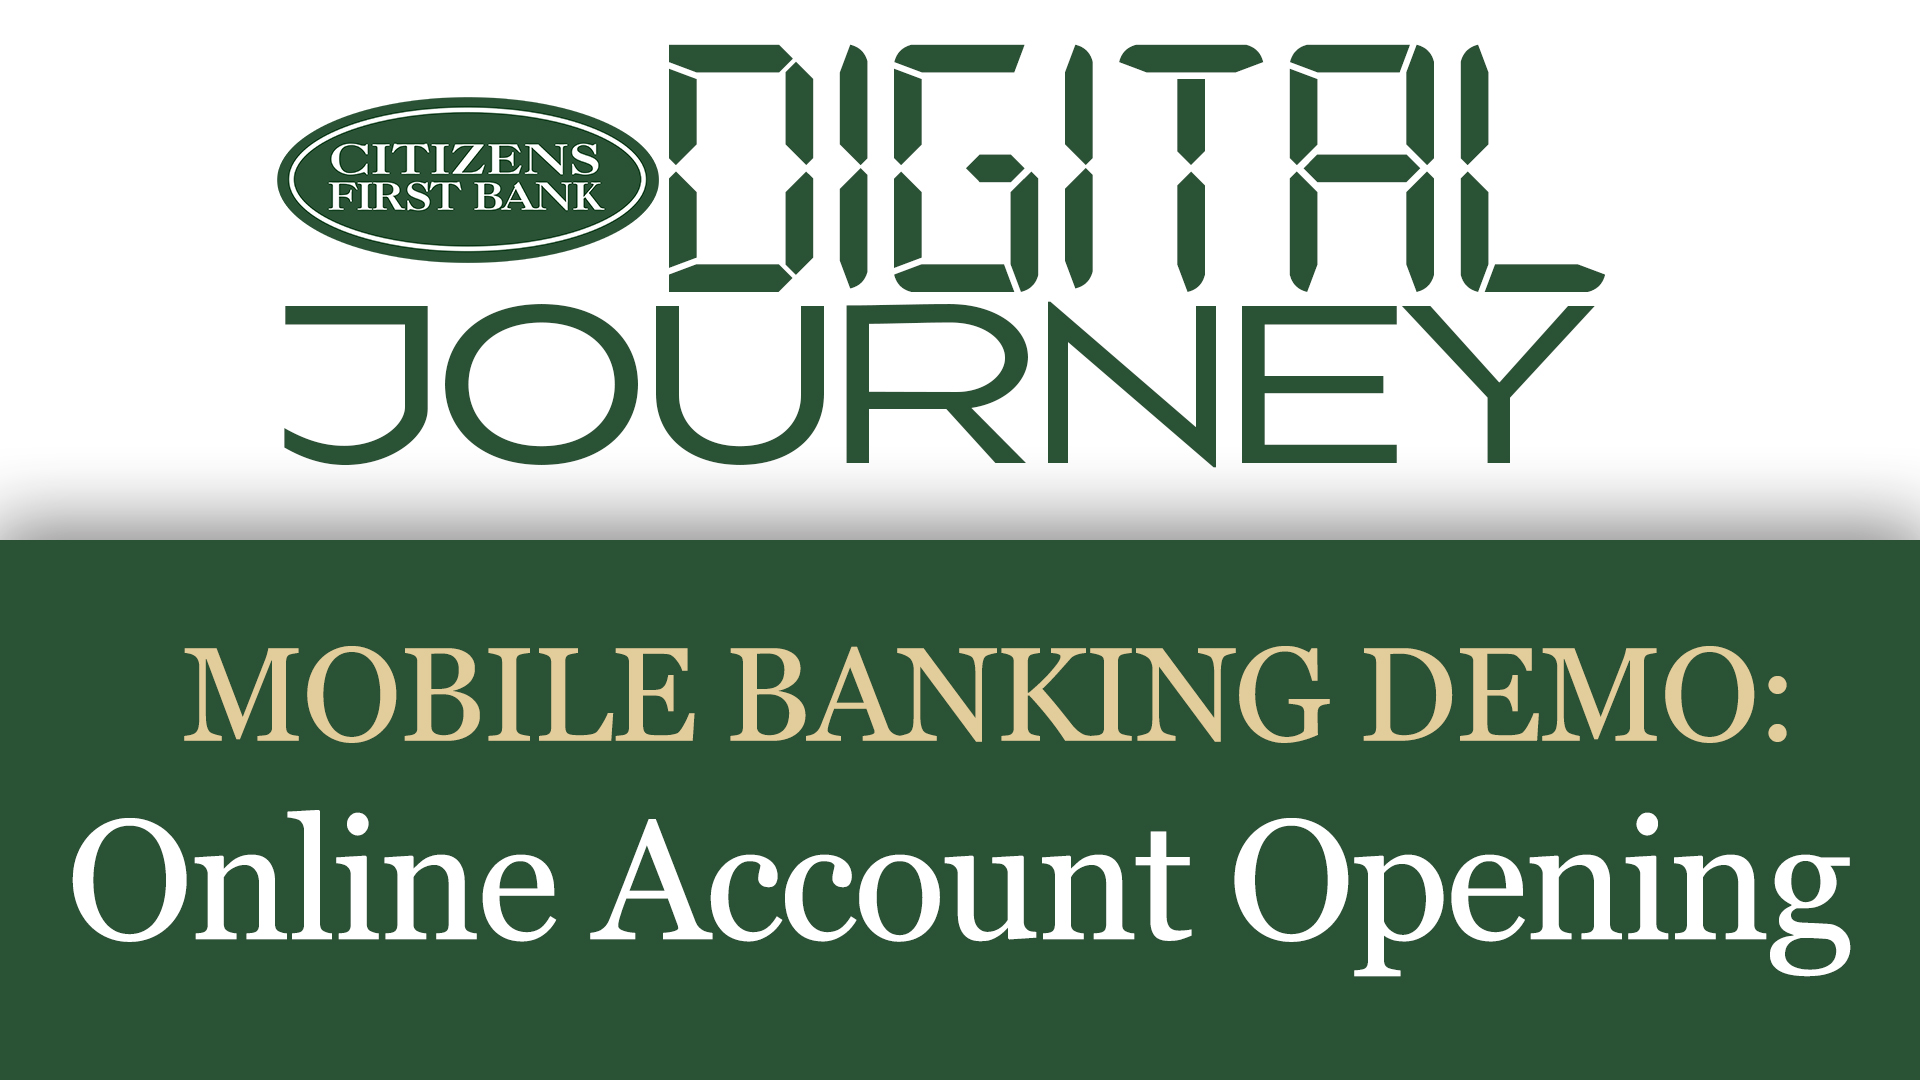 Digital Journey logo with our mobile banking demo: Online Account Opening